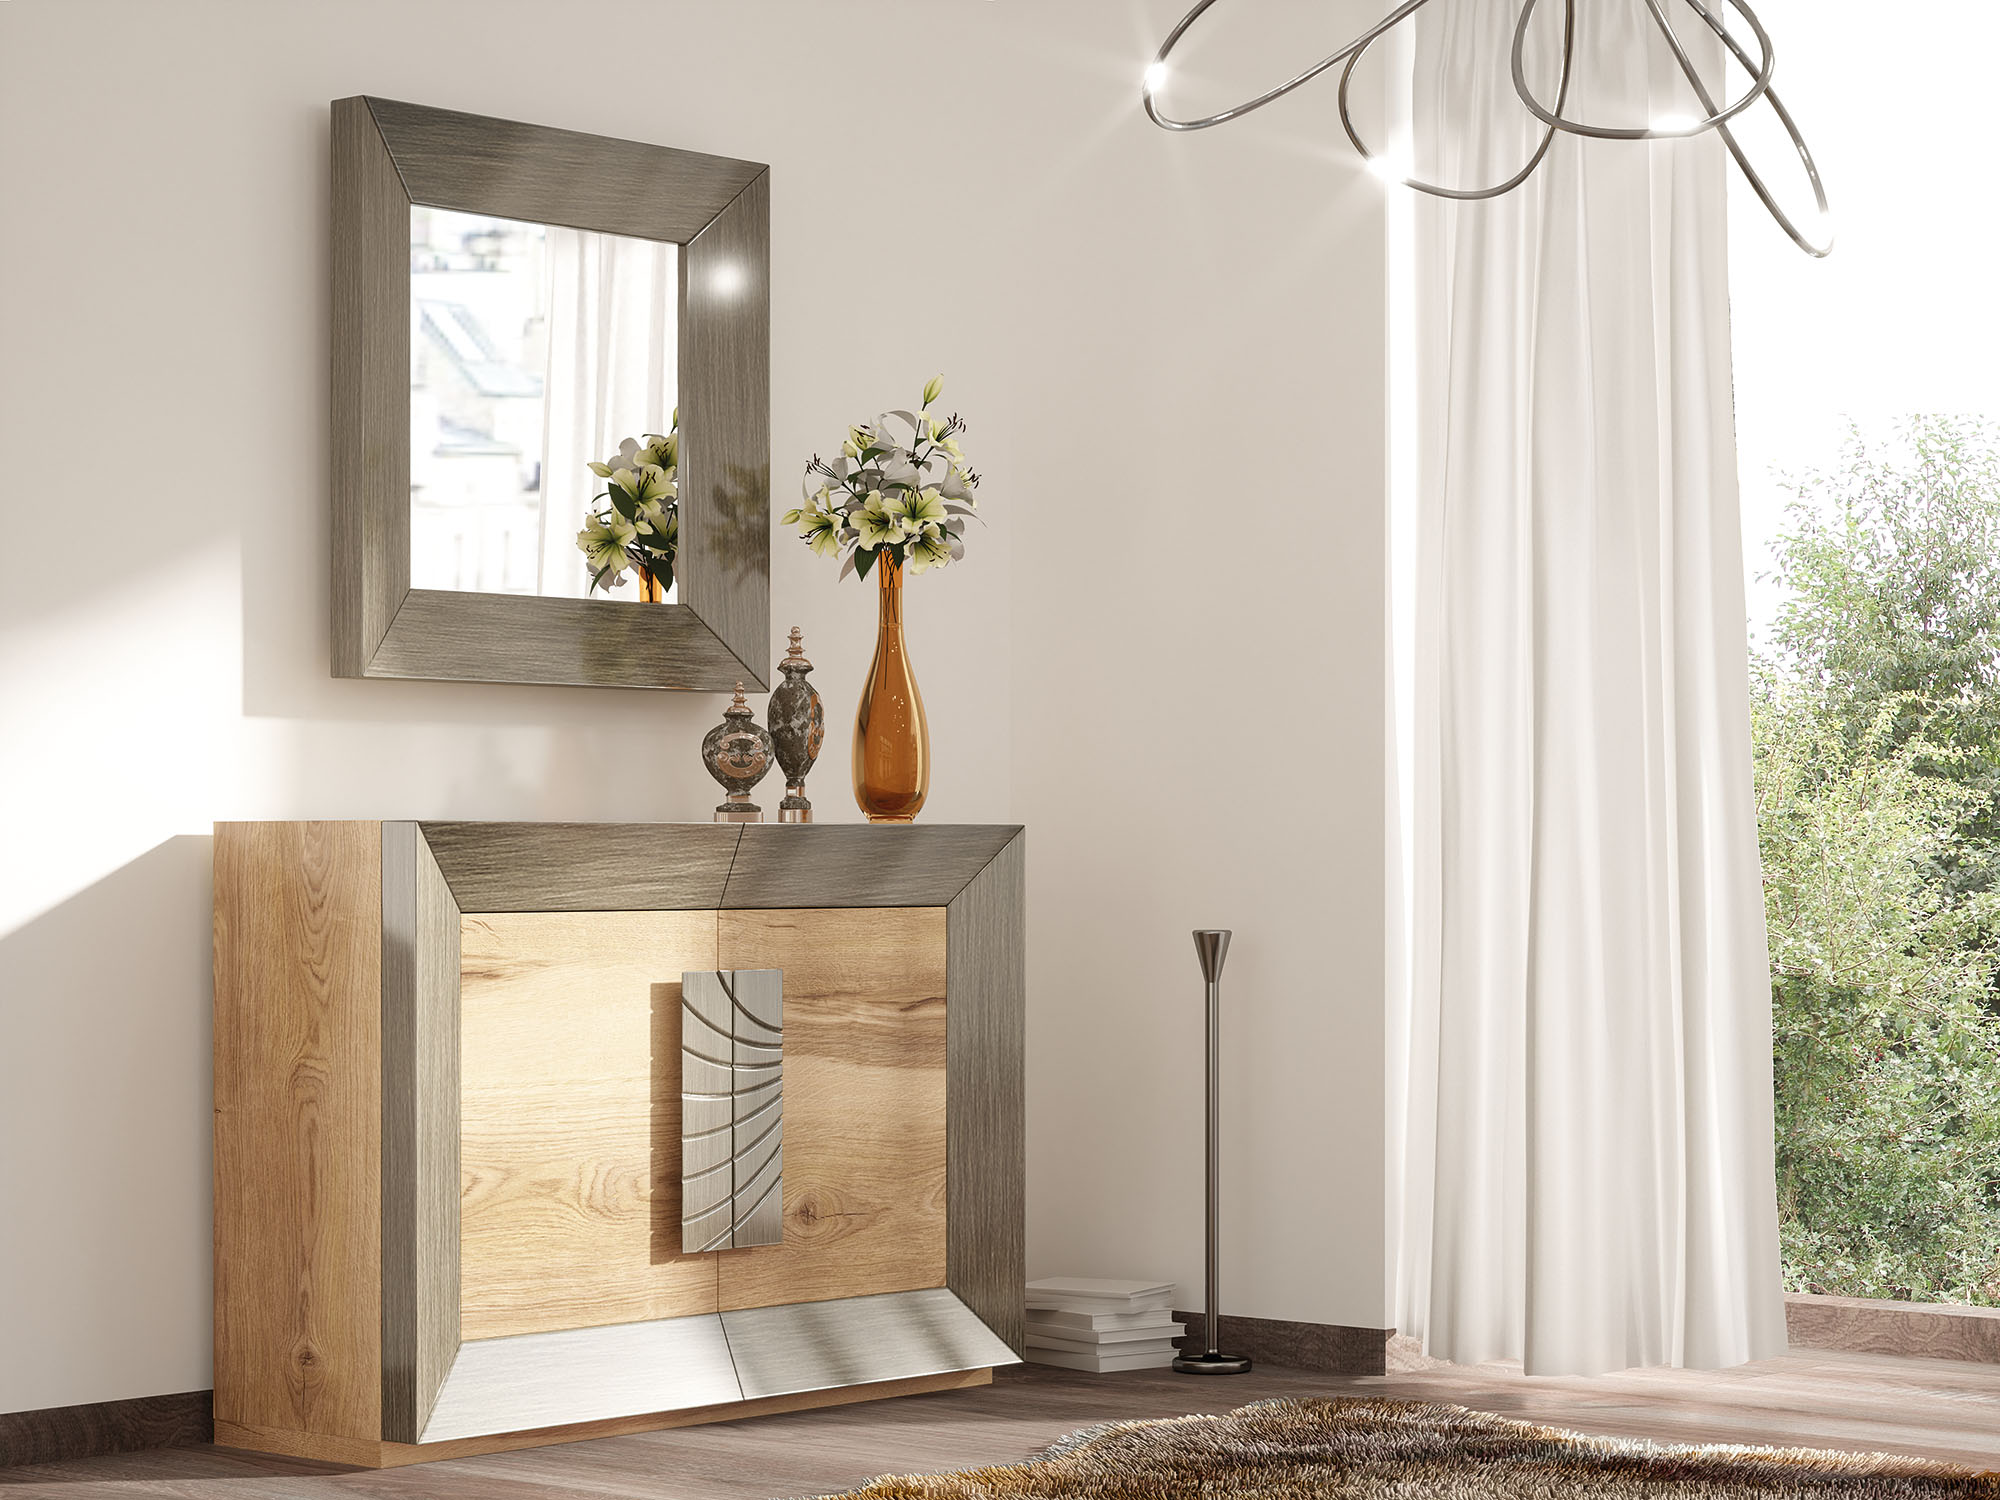 Brands Franco Kora Dining and Wall Units, Spain ZII.06 SHOE CABINET